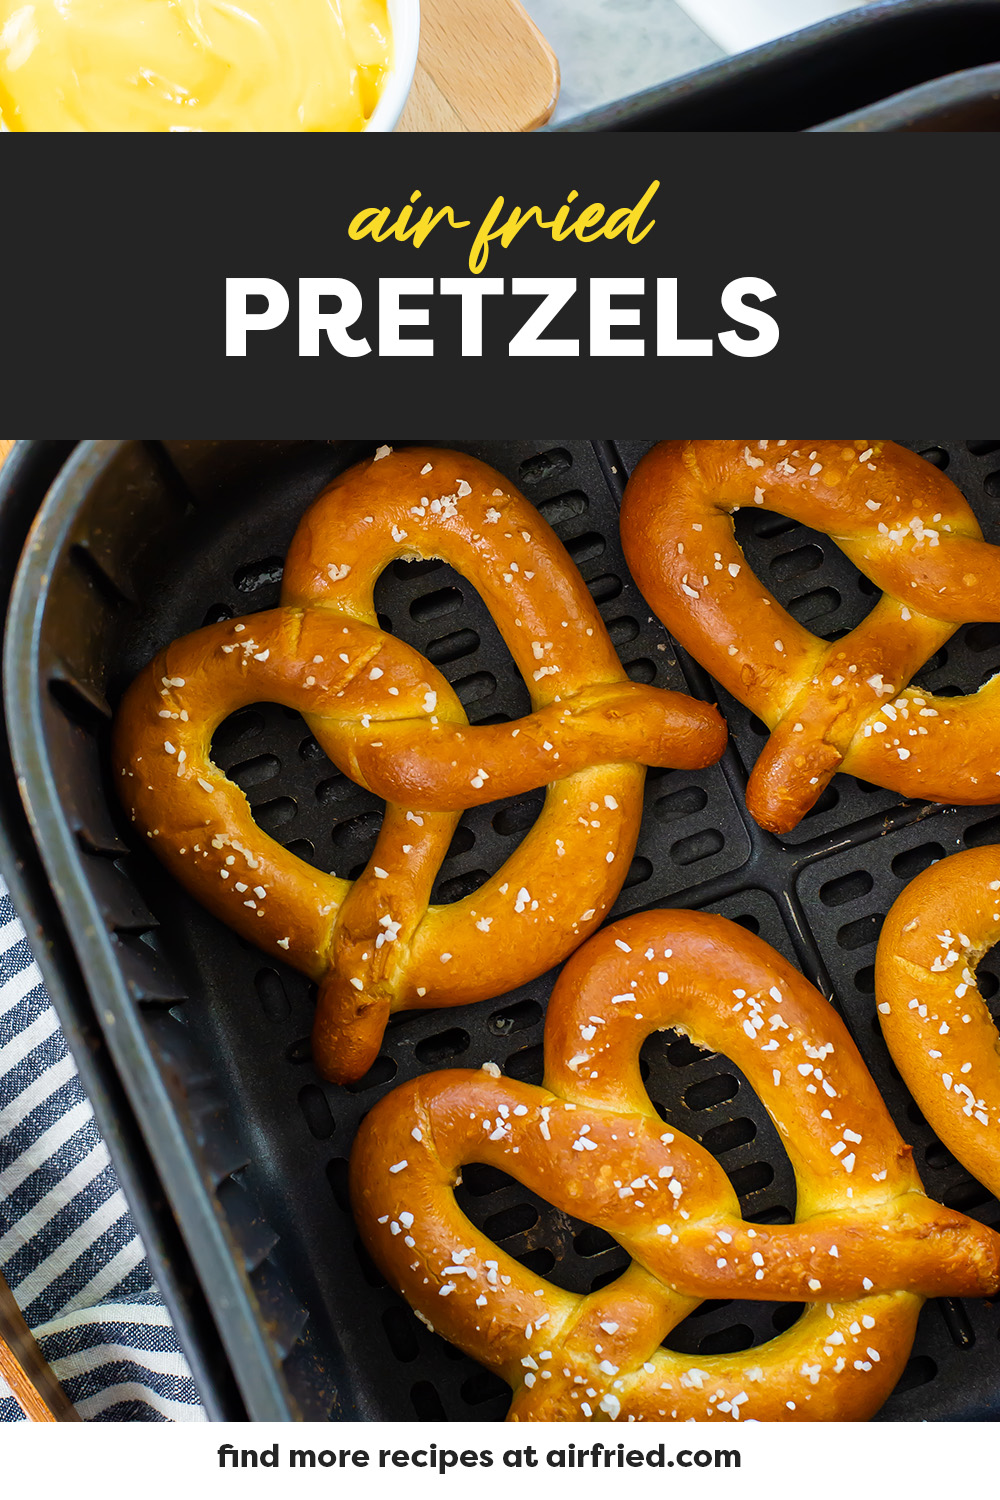 Salted to your liking, you can now make super soft pretzels at home in your air fryer!  No more going to the mall!